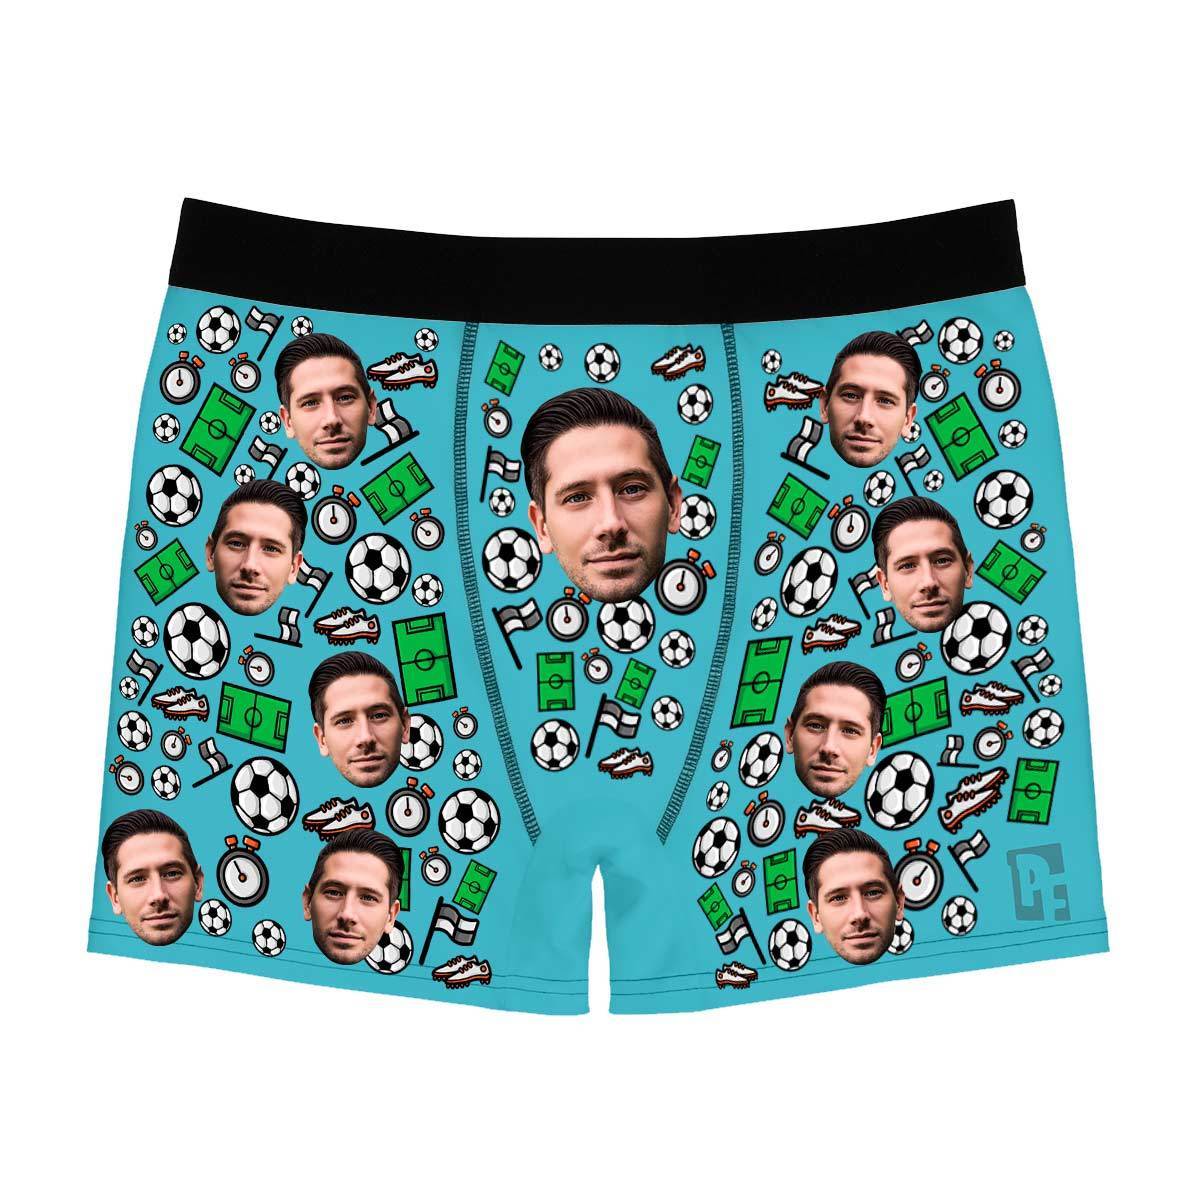 Blue Football men's boxer briefs personalized with photo printed on them